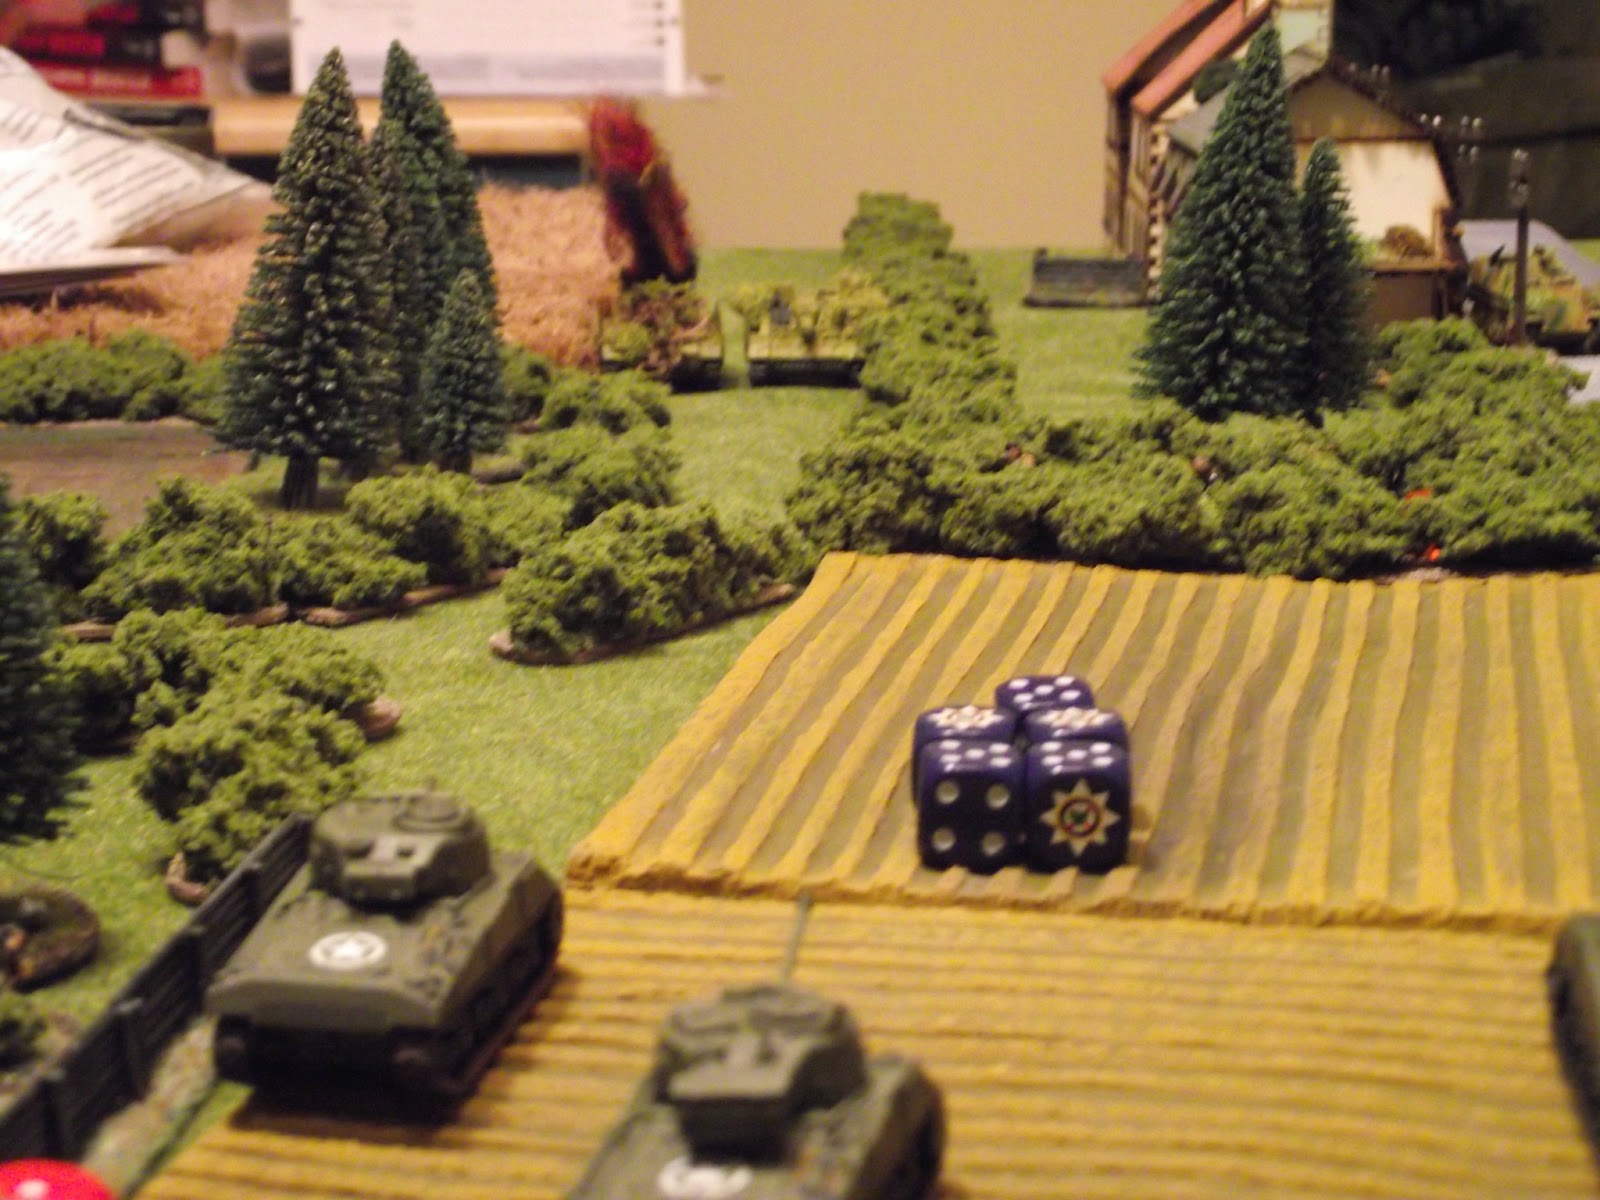   The StuG platoon manages to hit the Sherman on the right twice, but only managed to do some minor engine damage. The return fire from that same Sherman blew up the StuG on the left with a 5-0 score. The Firefly managed to knock out the 10.5cm StuG'